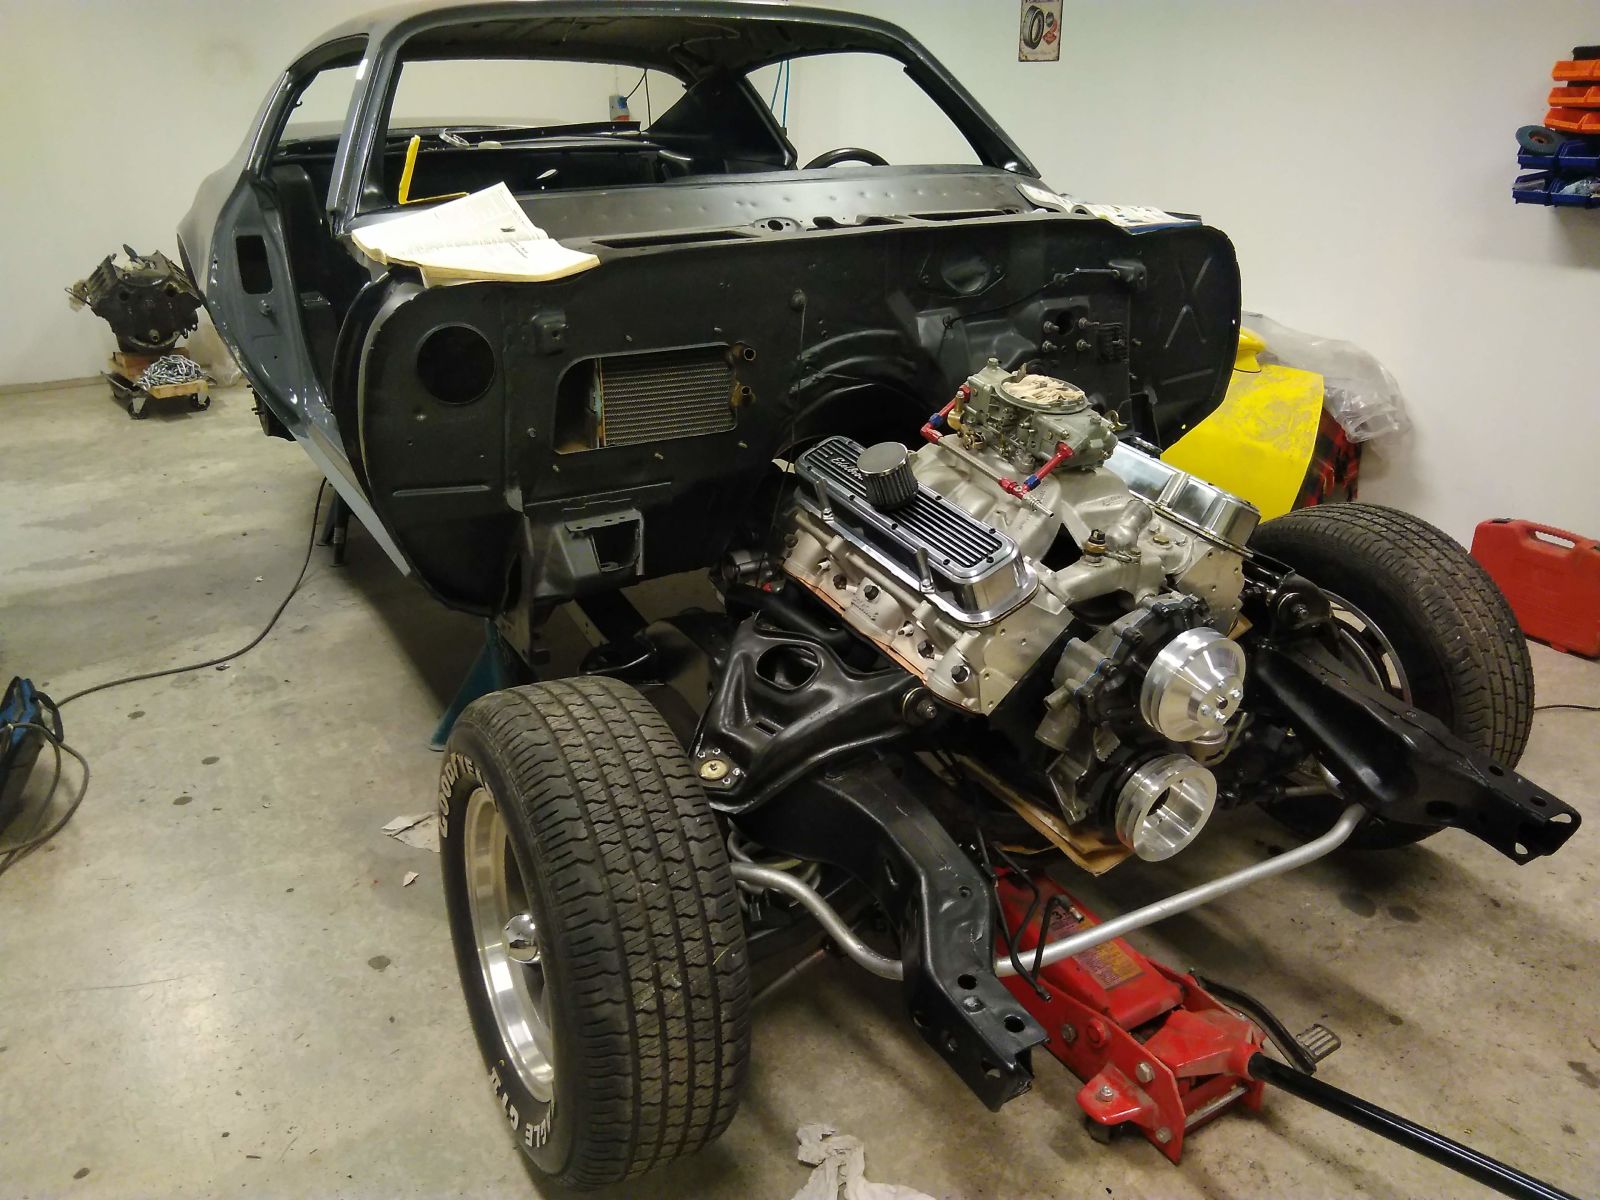 Installing engine in subframe and subframe on car is not the easiest thing to do on your own.